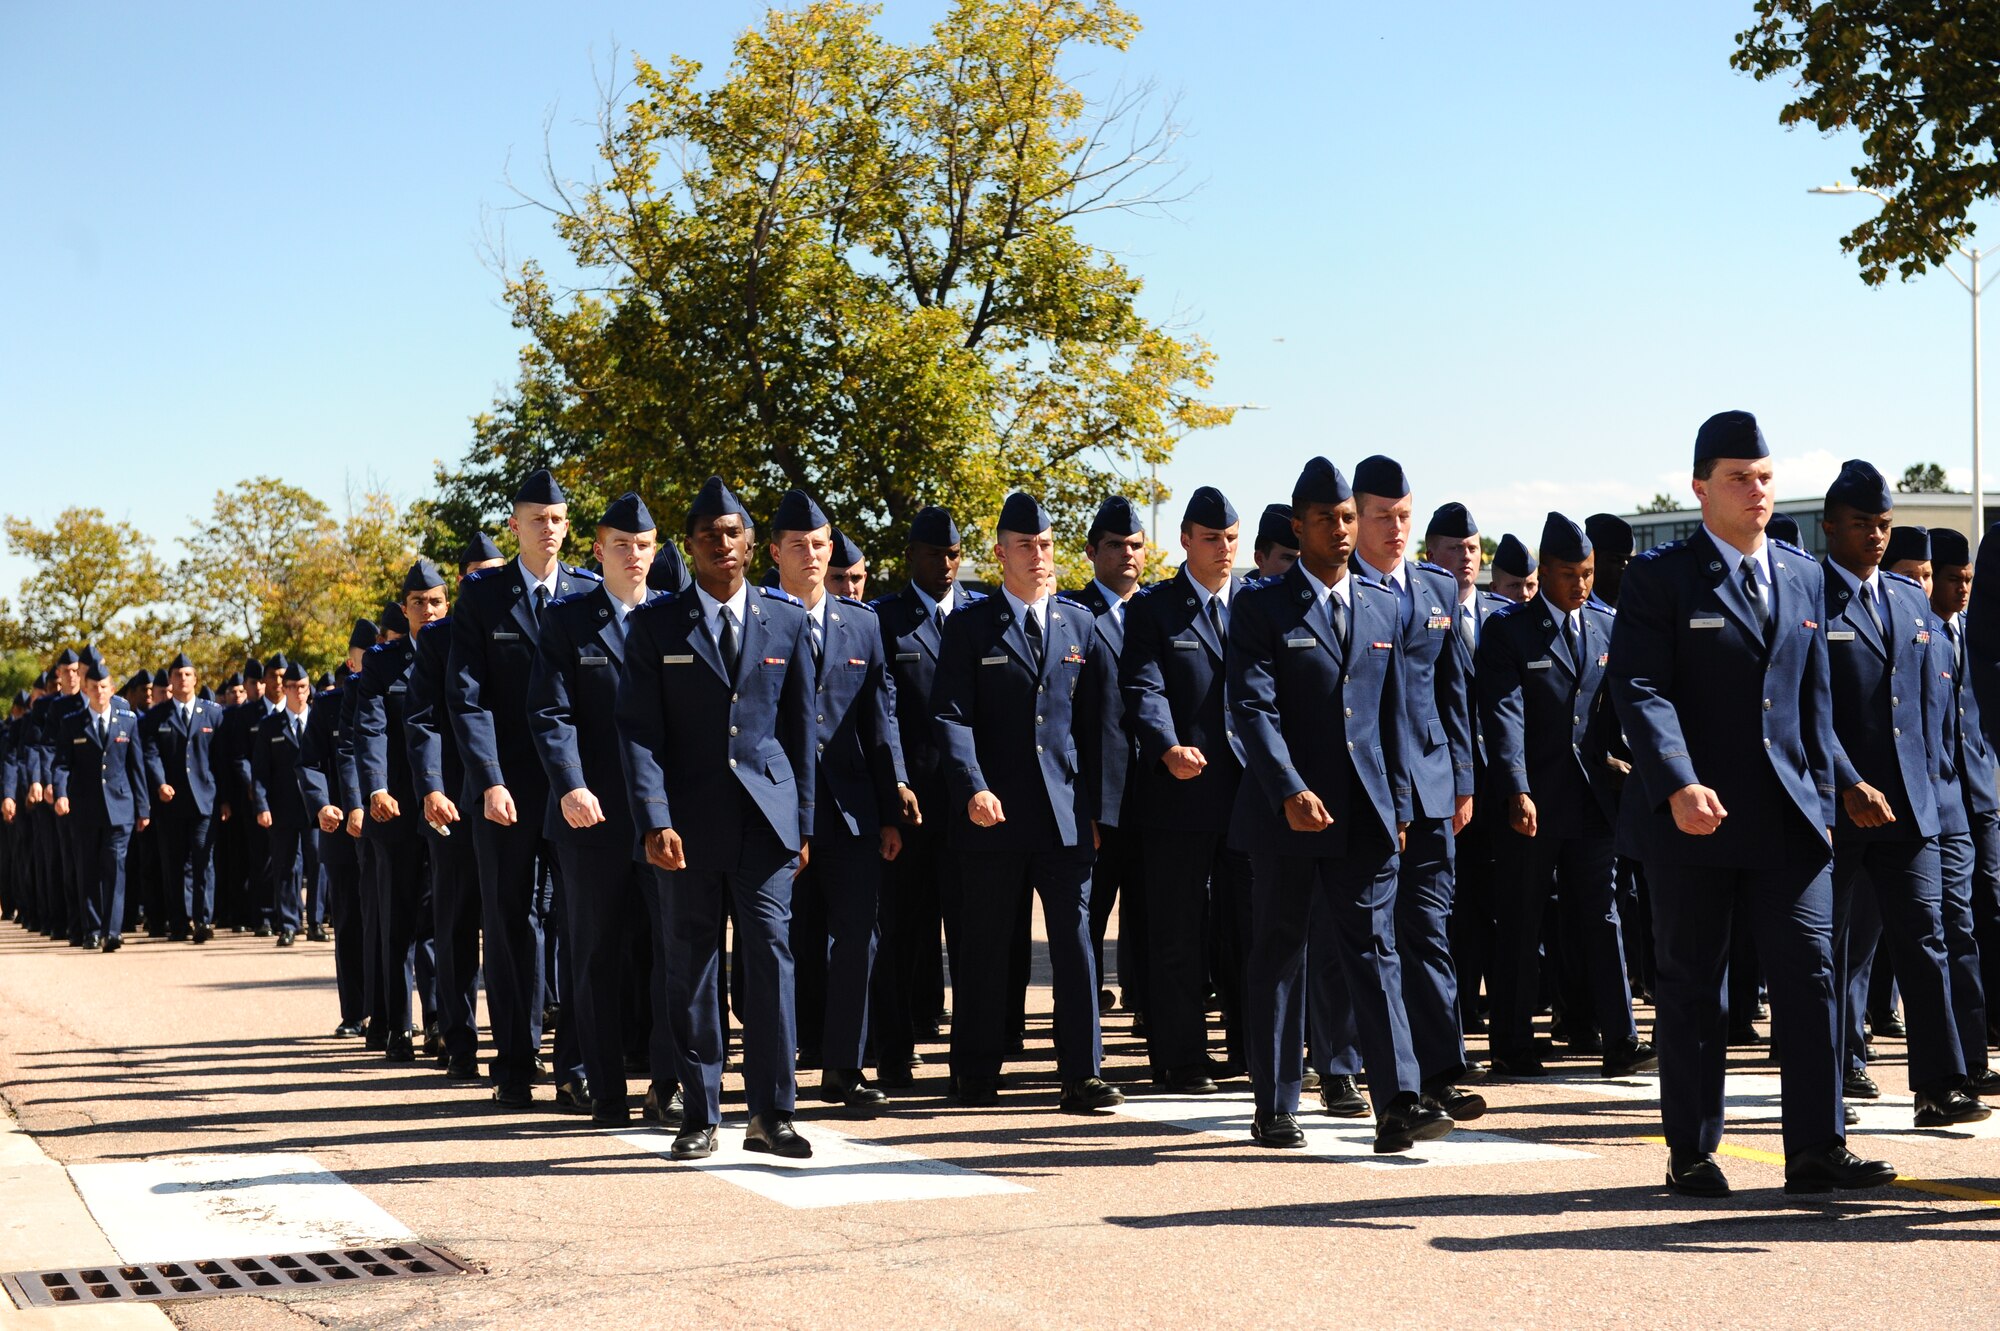 U.S. Air Force Academy Preparatory School cadet candidates exit the Prep School parade field here after a memorial commemorating National POW/MIA Recognition Day Sept. 19, 2014. The third Friday in September was set aside annually beginning in 1998 for this commemoration. (U.S. Air Force photo/Airman 1st Class Rachel Hammes)